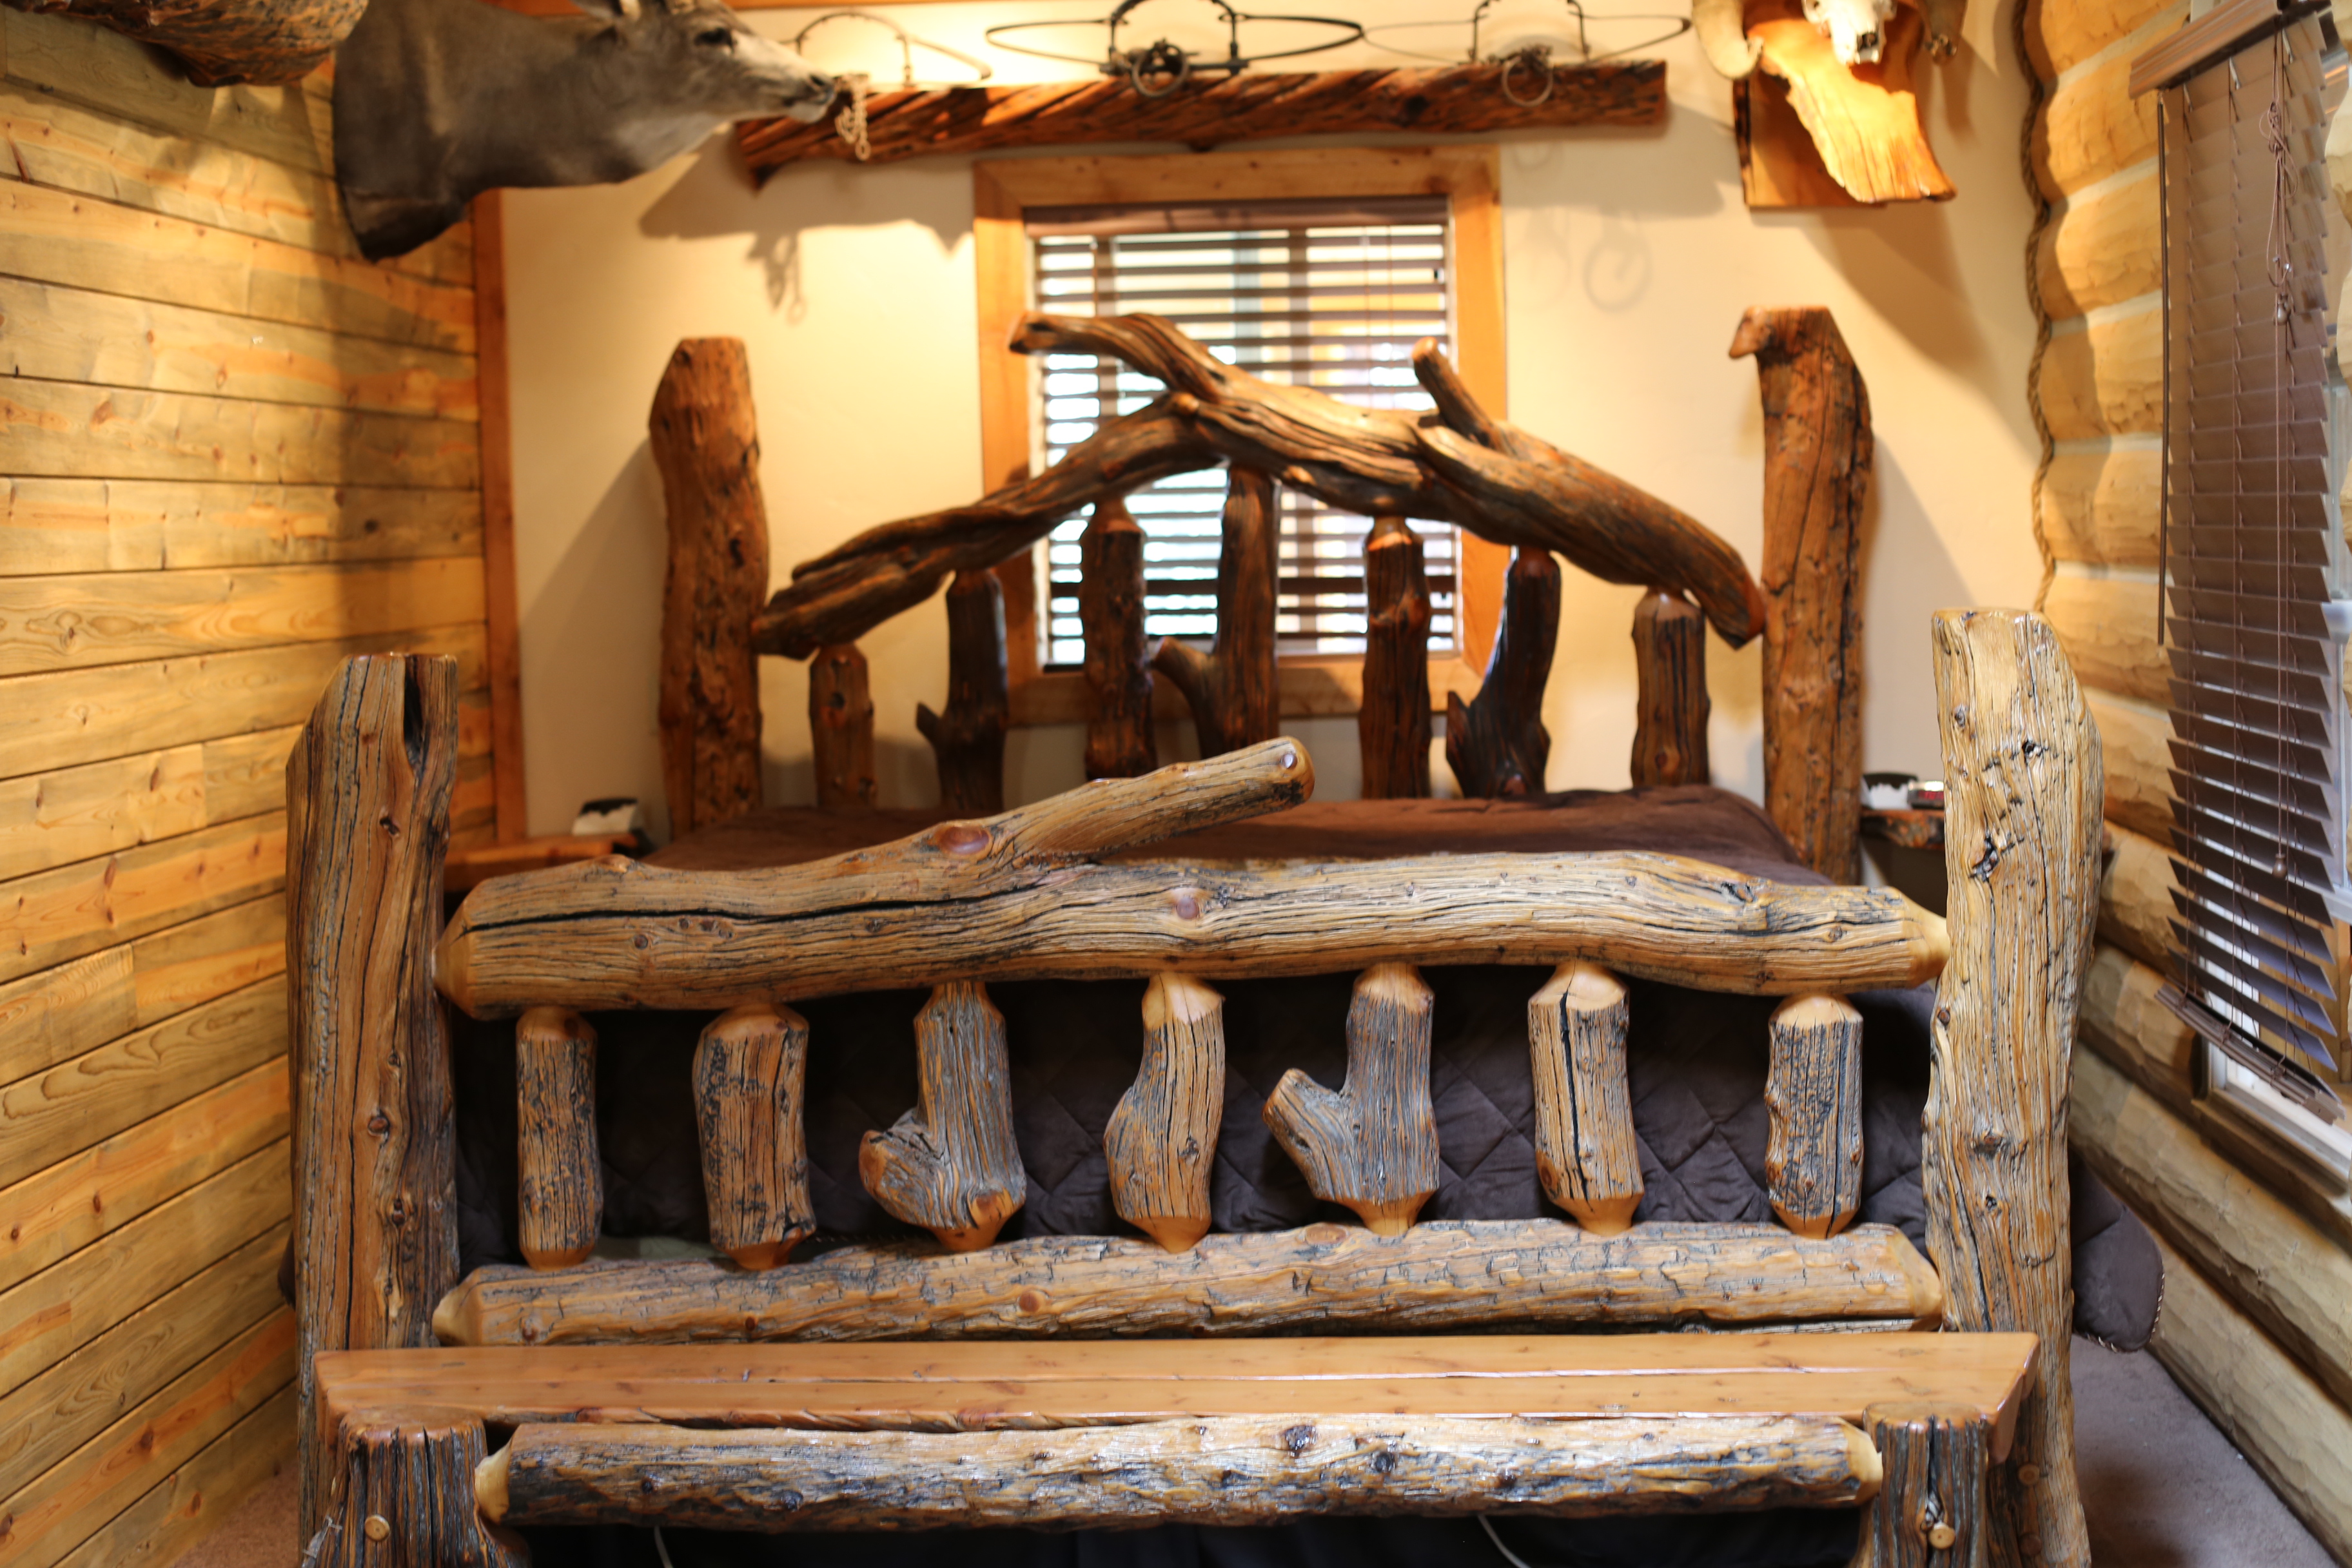 This king-size bed, Hibbs’s first woodworking project, sits in his cabin not far from Antero Reservoir.